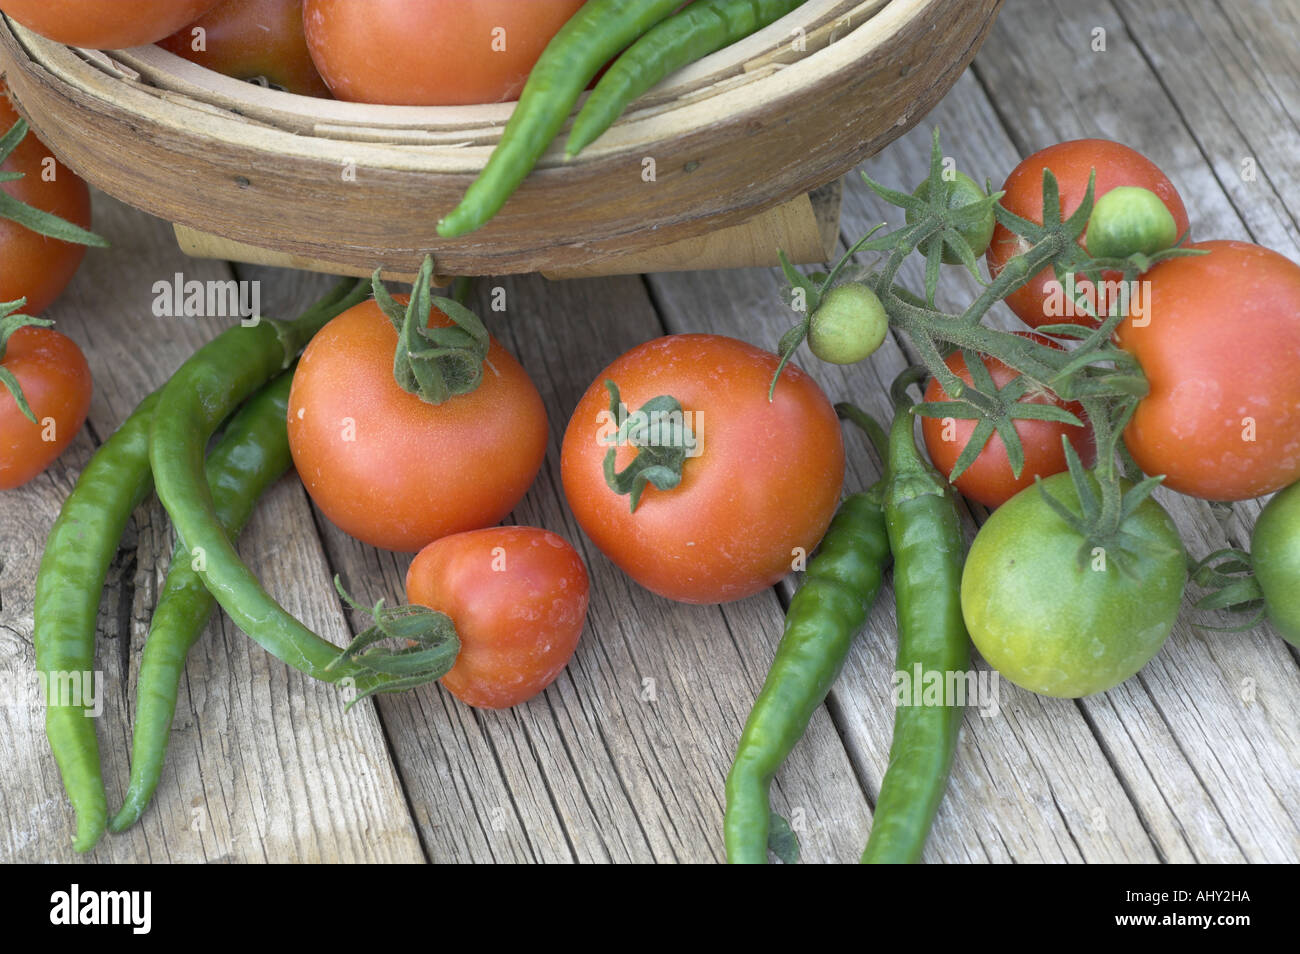 Freshly picked Home grown organic tomatoes and green chillis with rustic trug on weathered garden table Stock Photo